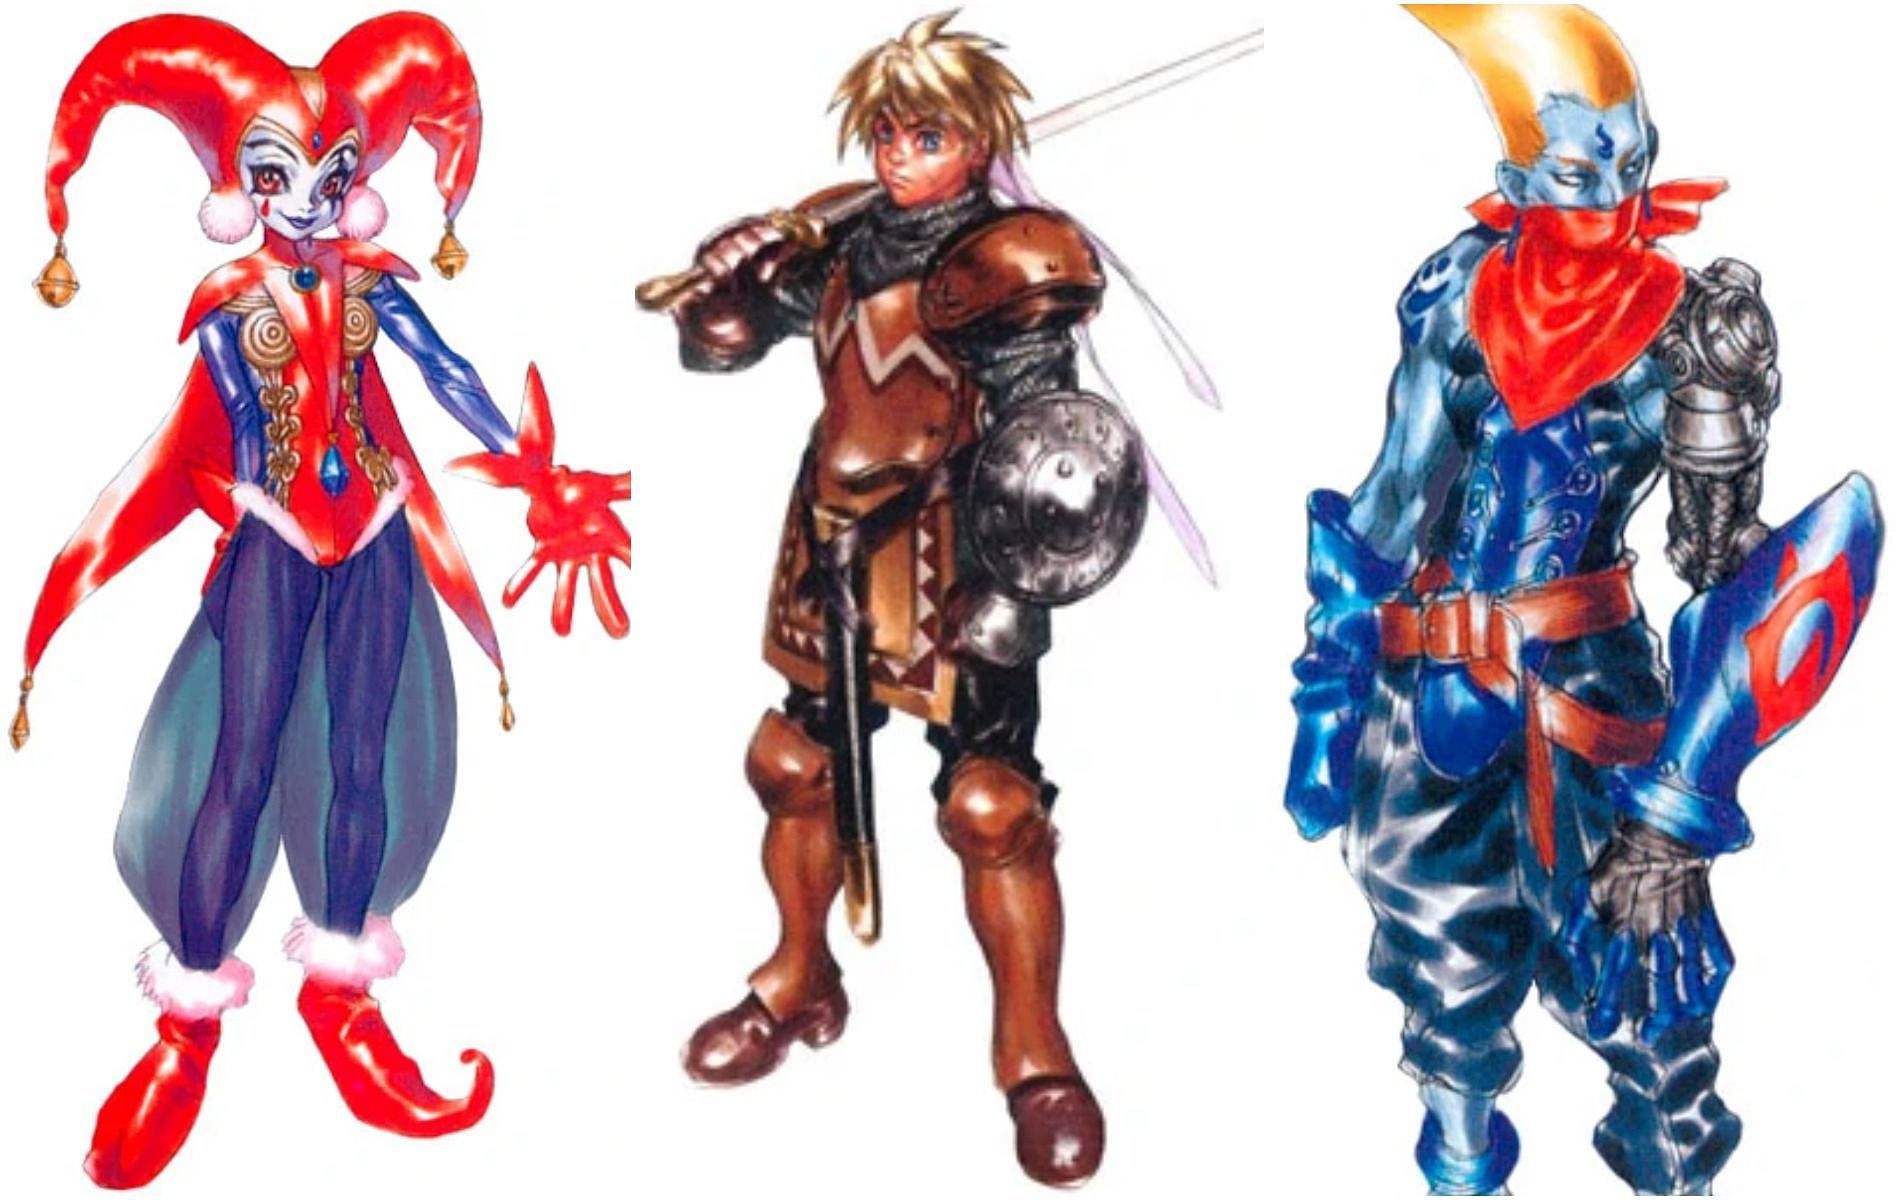 Chrono Cross: The Radical Dreamers Edition has many characters, but who are the best? (Image via Square Enix)